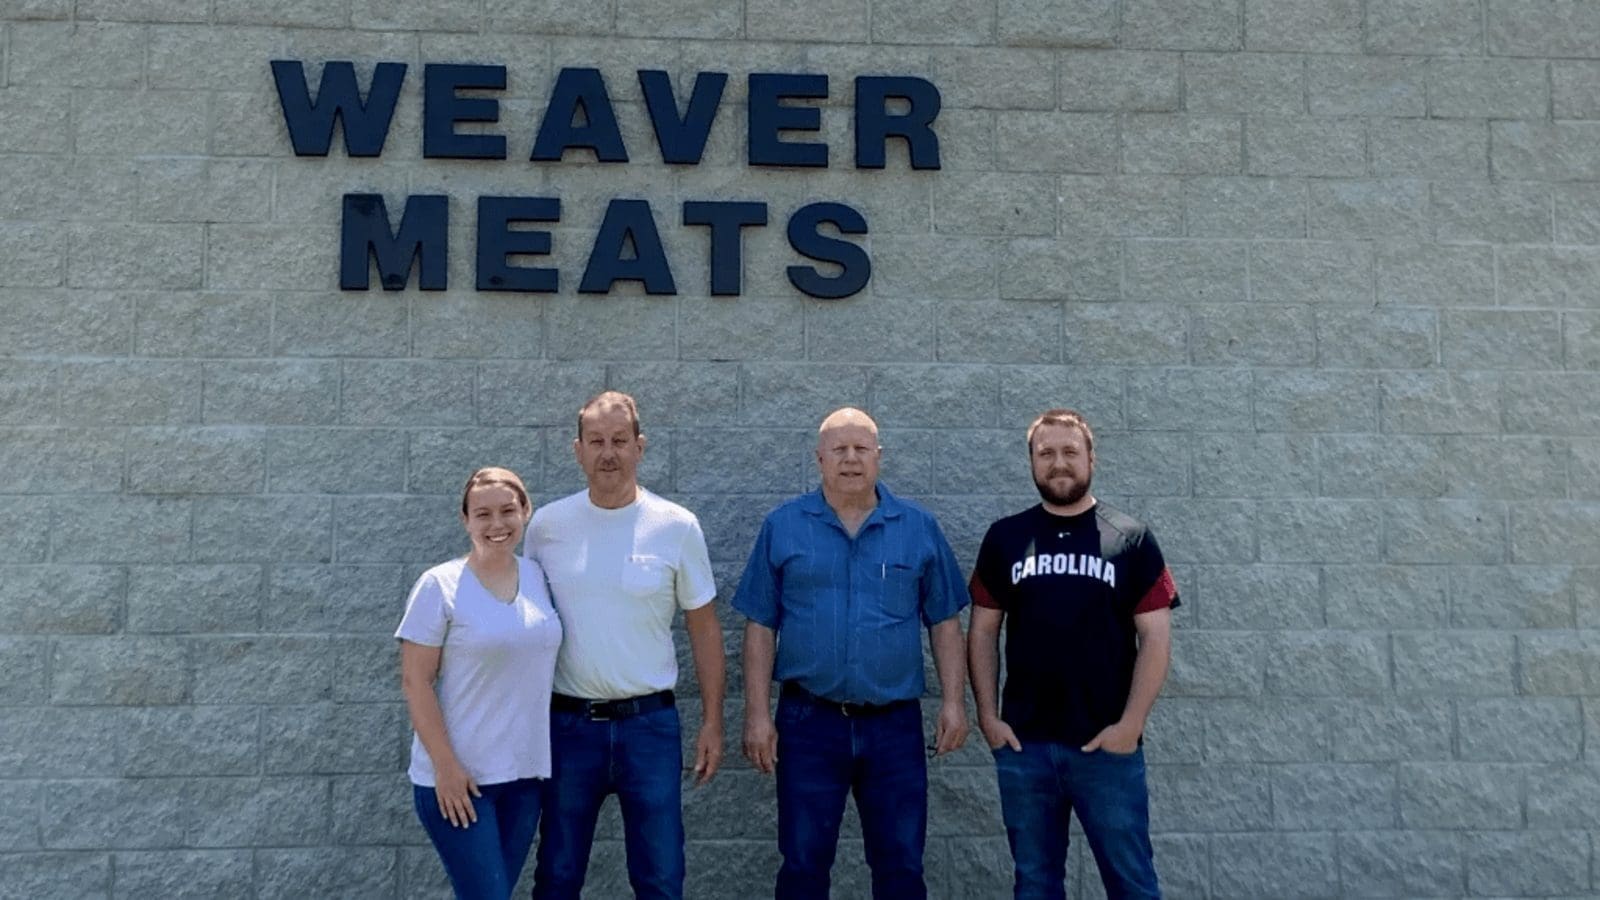 Weaver Meats secures grant from Ohio State government to expand operations